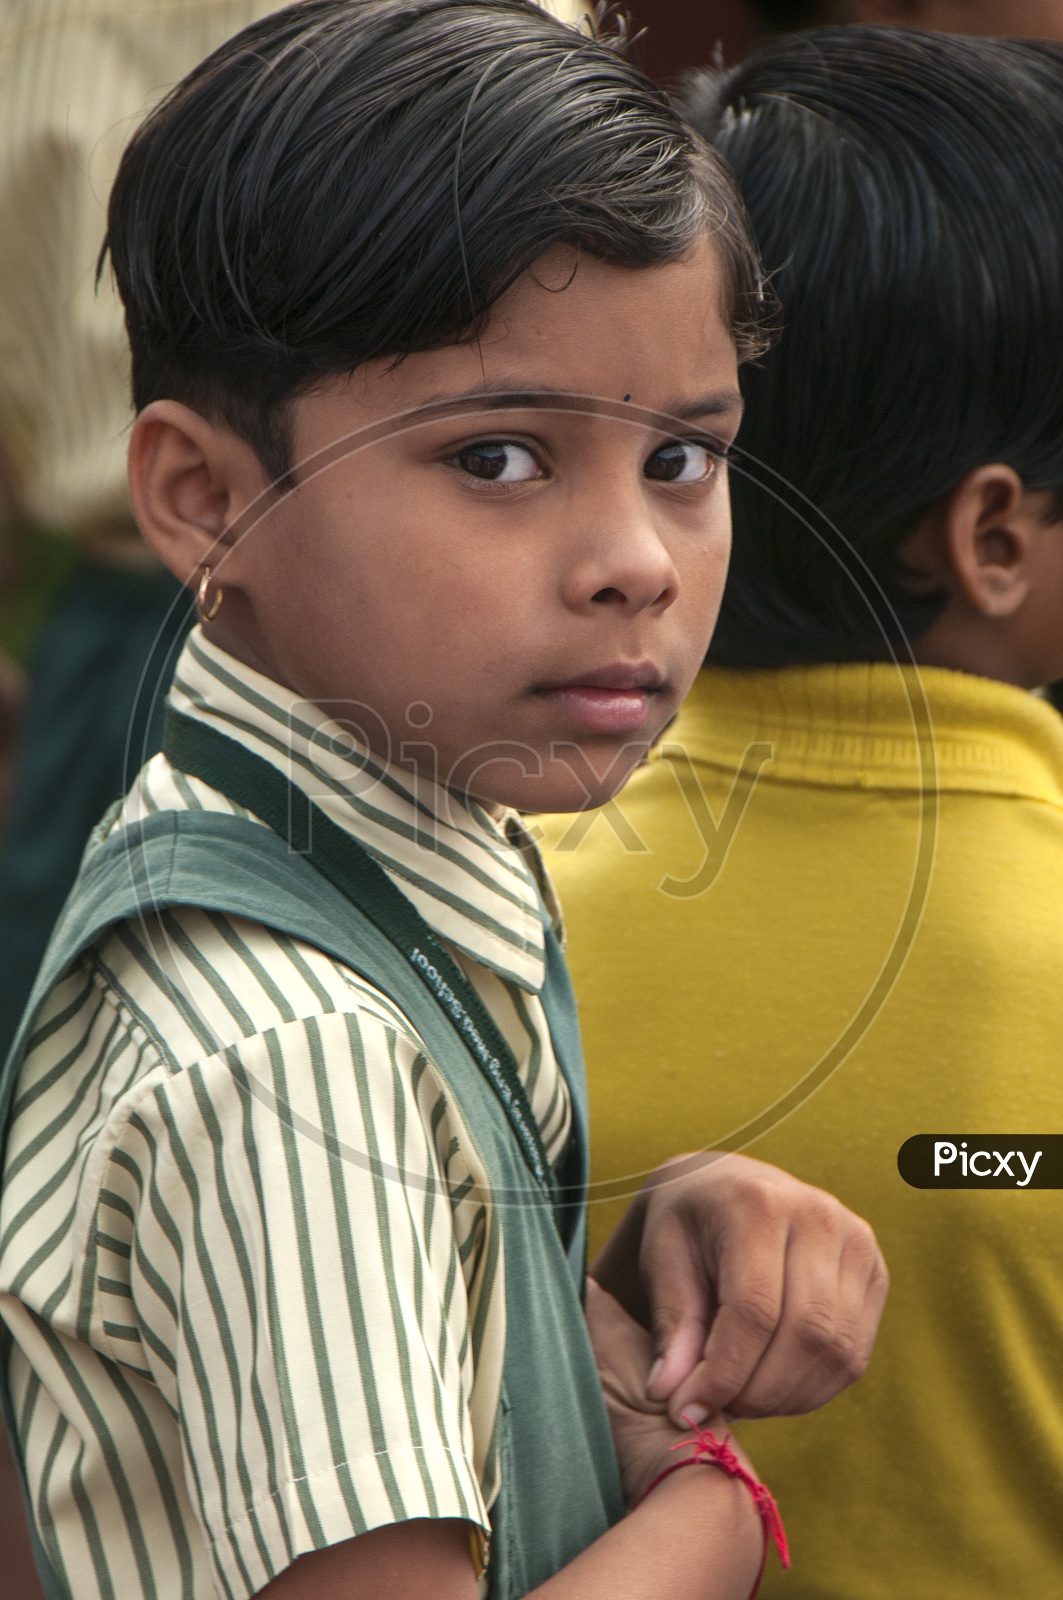 Image of Indian boy with silky hair making an expression-MS427216-Picxy